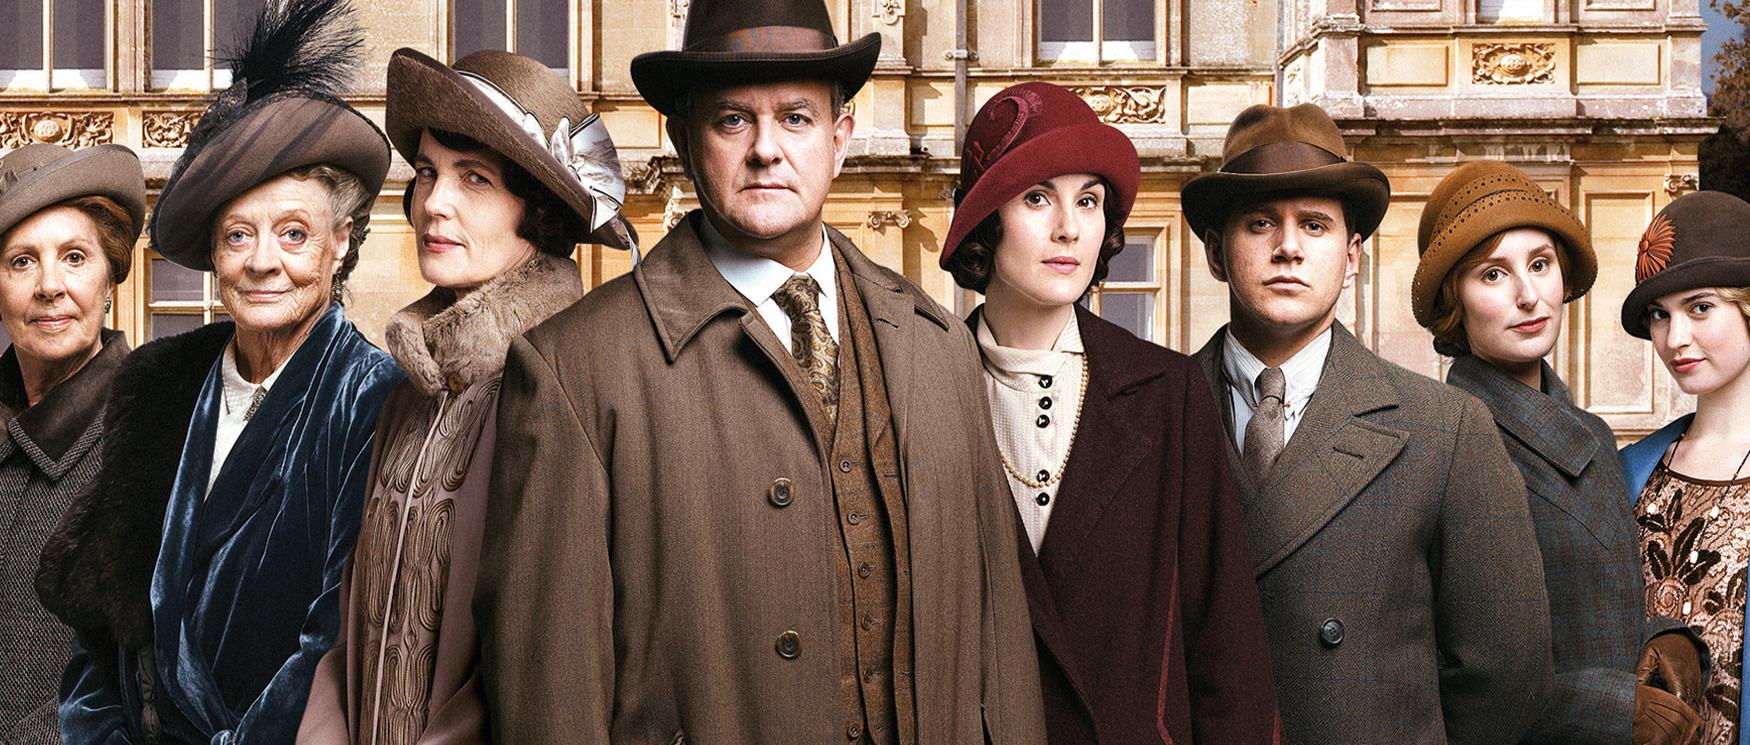 The Cast of Downton Abbey